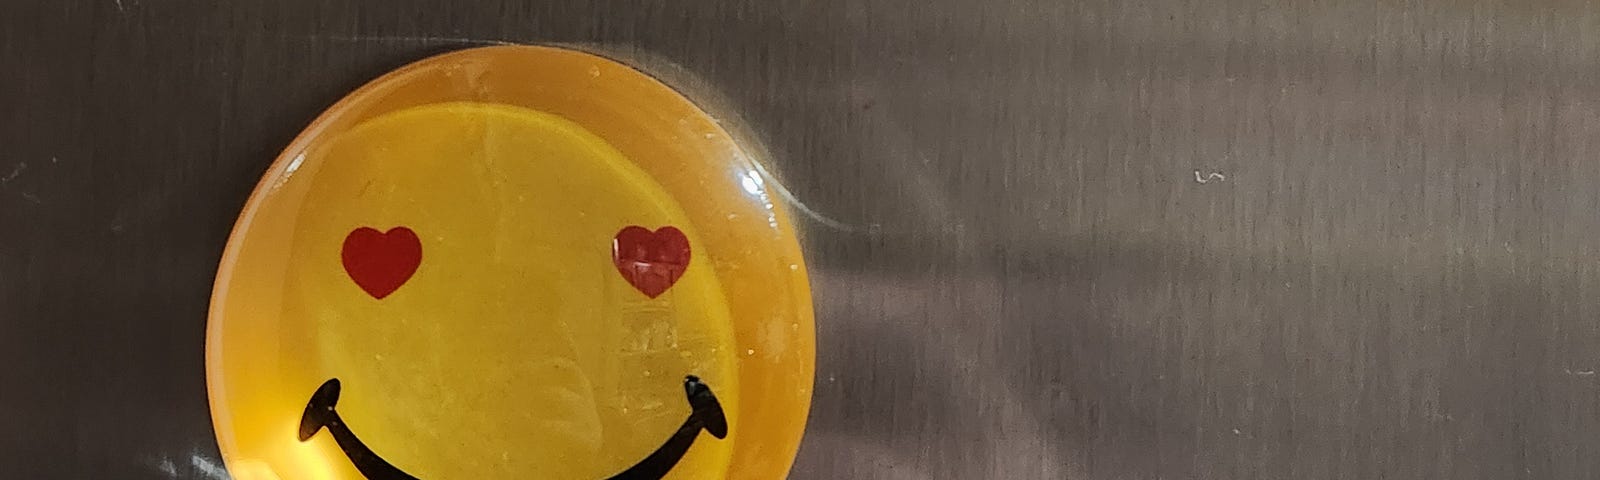 A yellow smiley face emoji with red hearts for eyes, happy you are being in your input time!